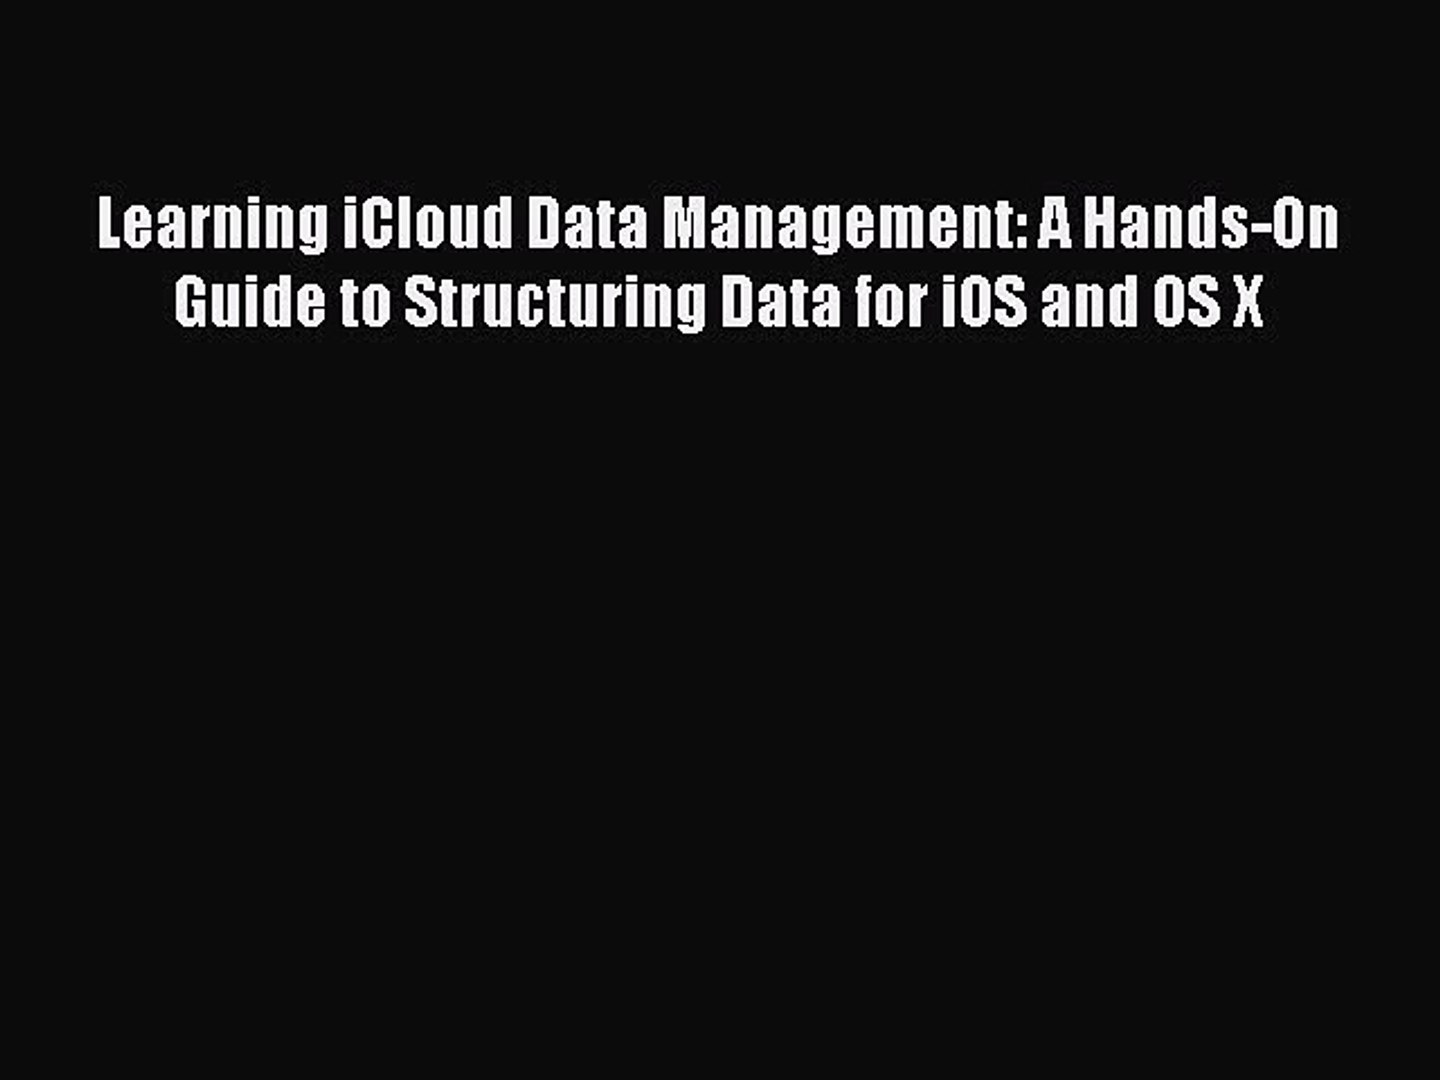 [Read PDF] Learning iCloud Data Management: A Hands-On Guide to Structuring Data for iOS and